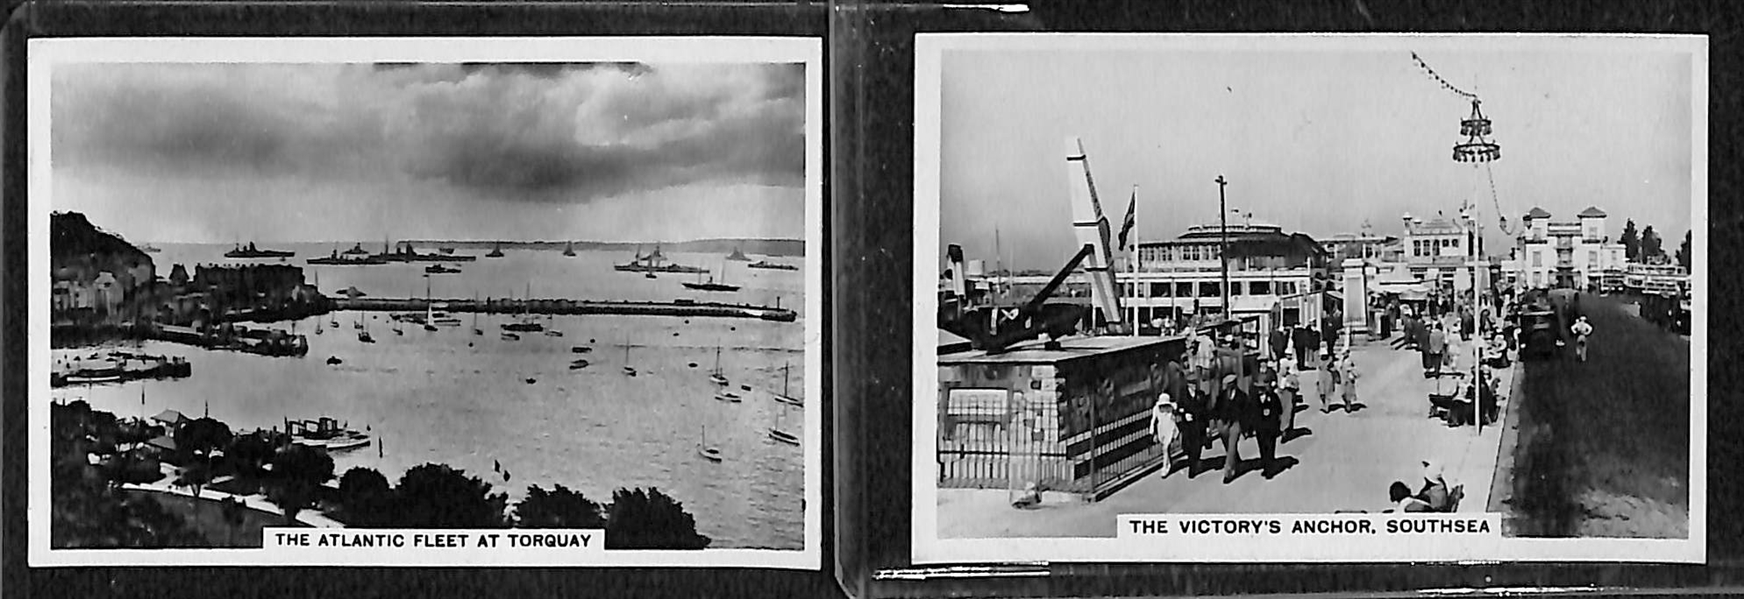 Lot of 40 1920-1930s Scenery Cigarette Cards